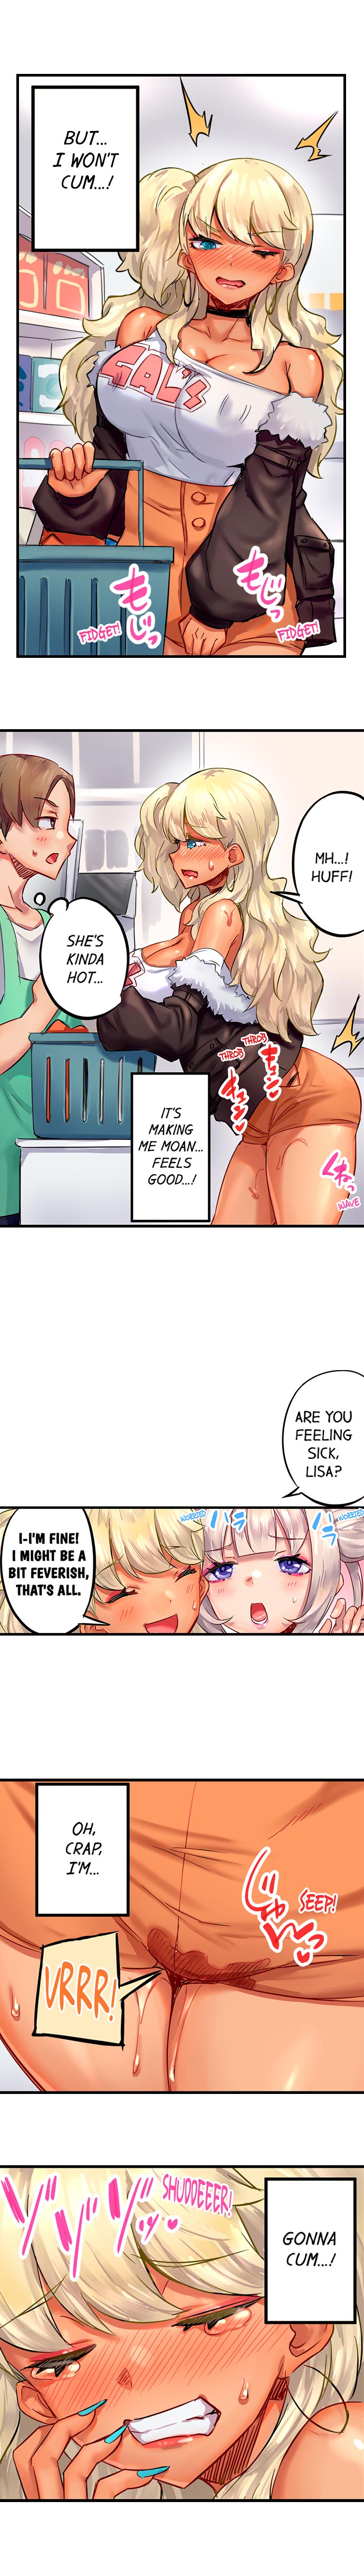 Orgasm Management for This Tanned Girl - Chapter 7 Page 8